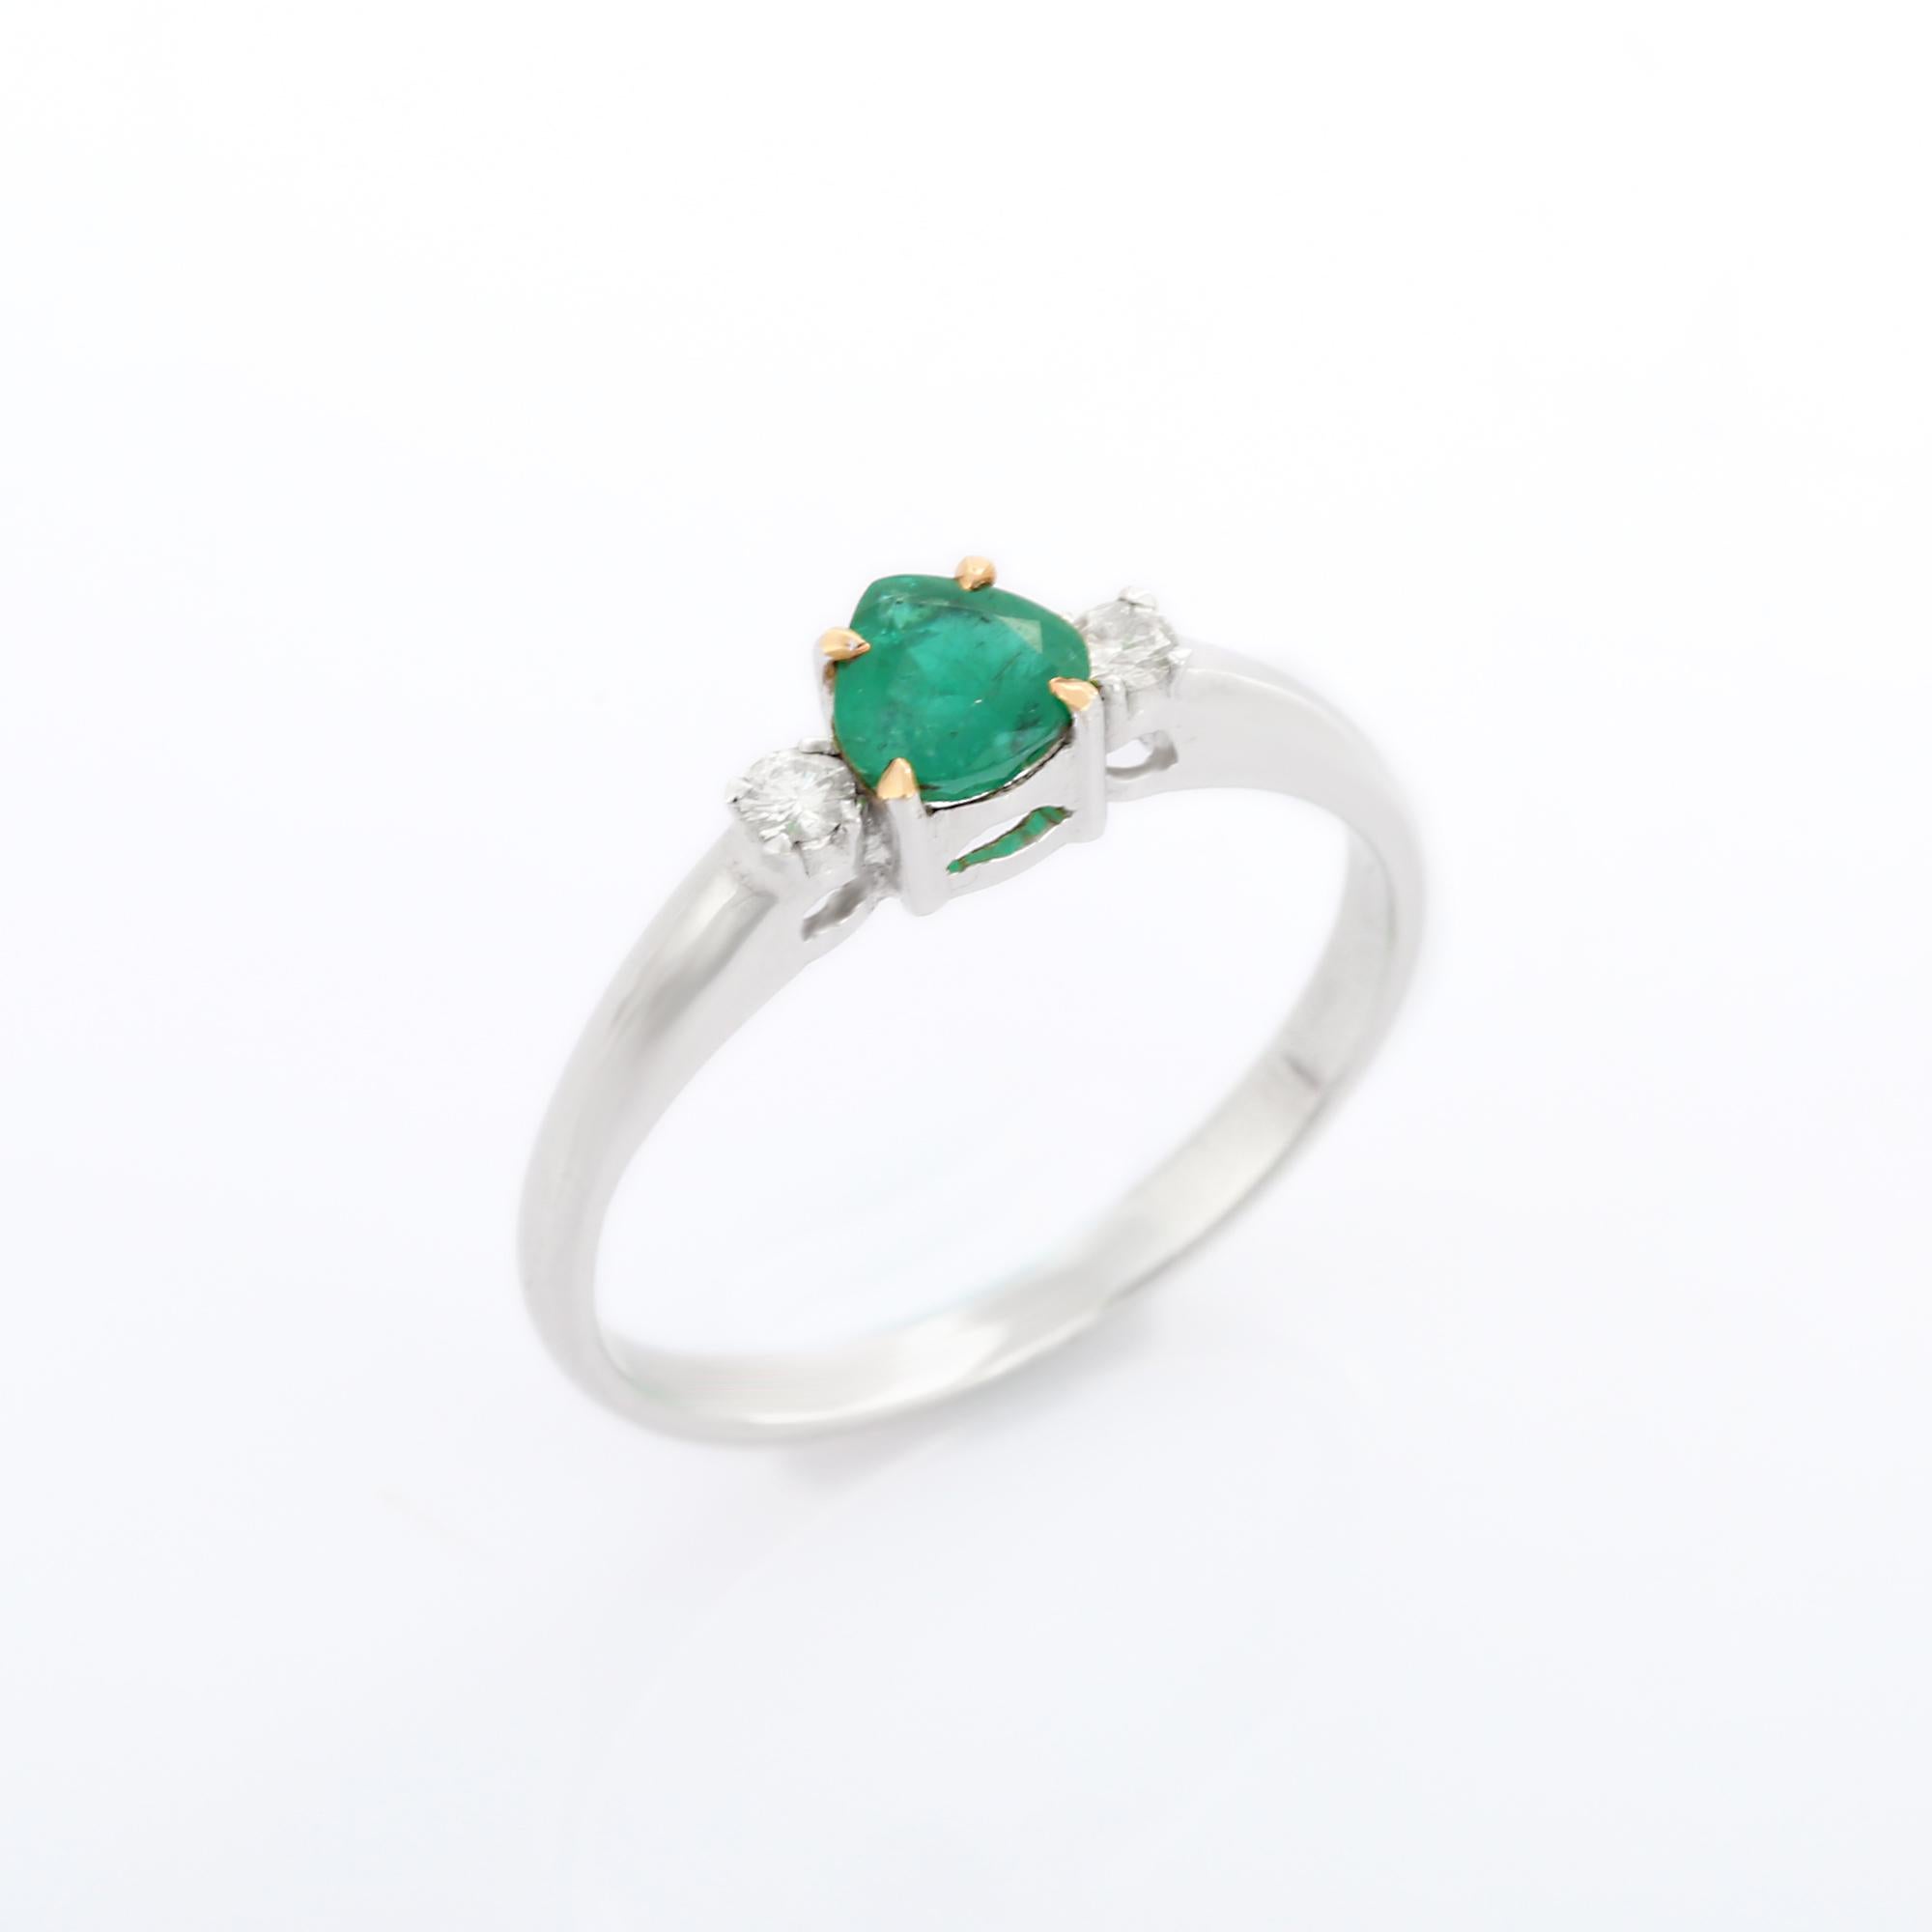 For Sale:  18k Solid White Gold Emerald Ring with Diamonds 6